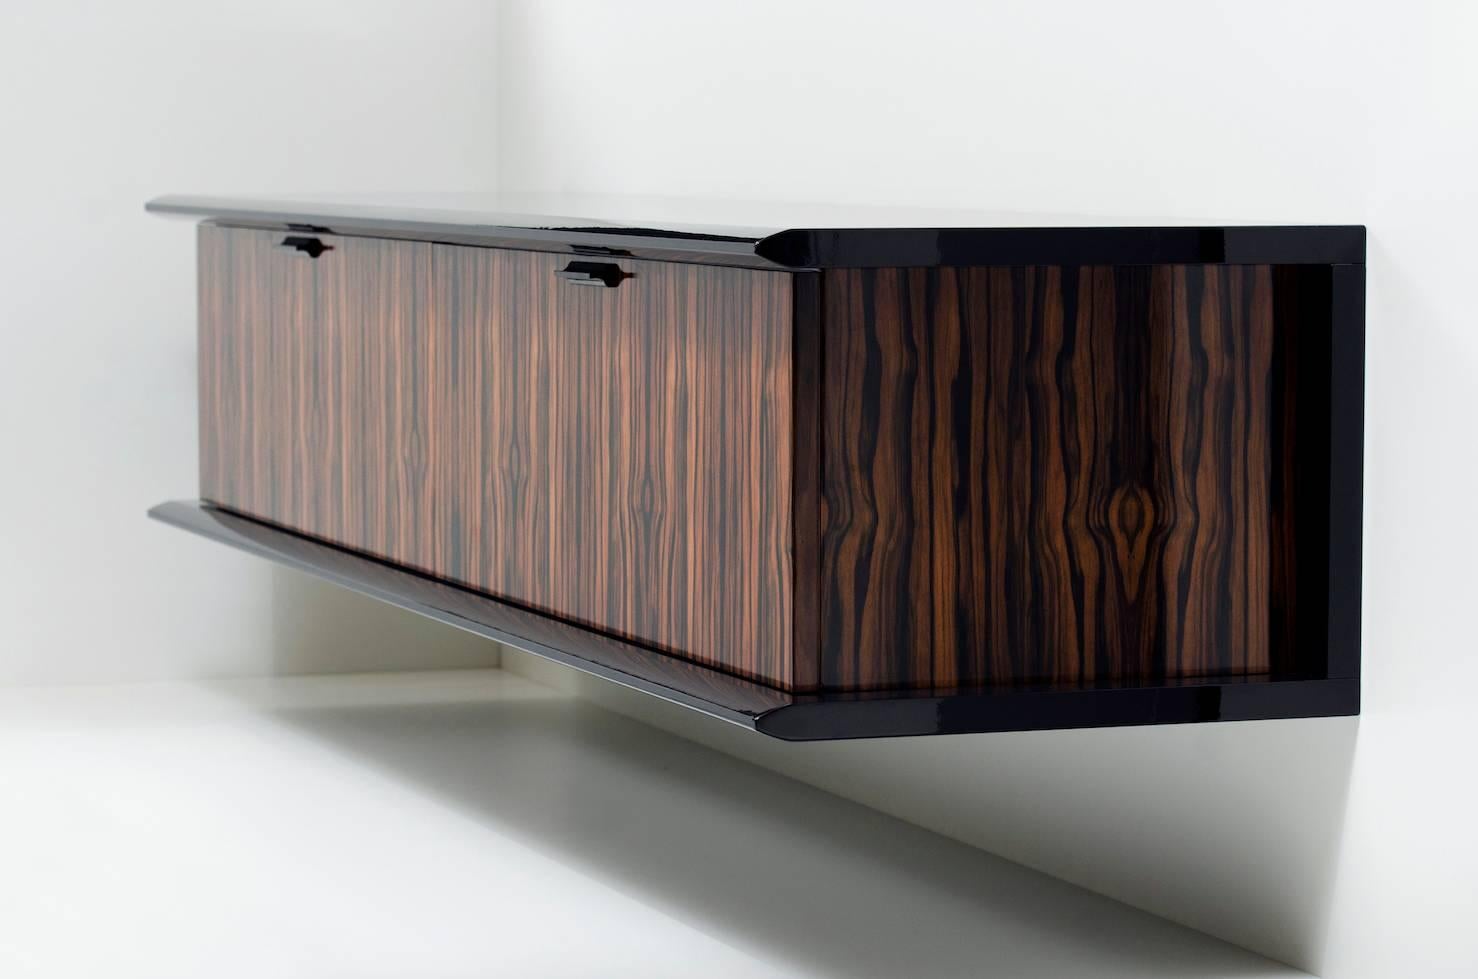 Shown in French polished Macassar ebony and black lacquer, with sycamore and black leather interior. The Model One credenza by Pipim is customizable to any dimension and is available in a variety of woods, stains and lacquers. Multiple interior